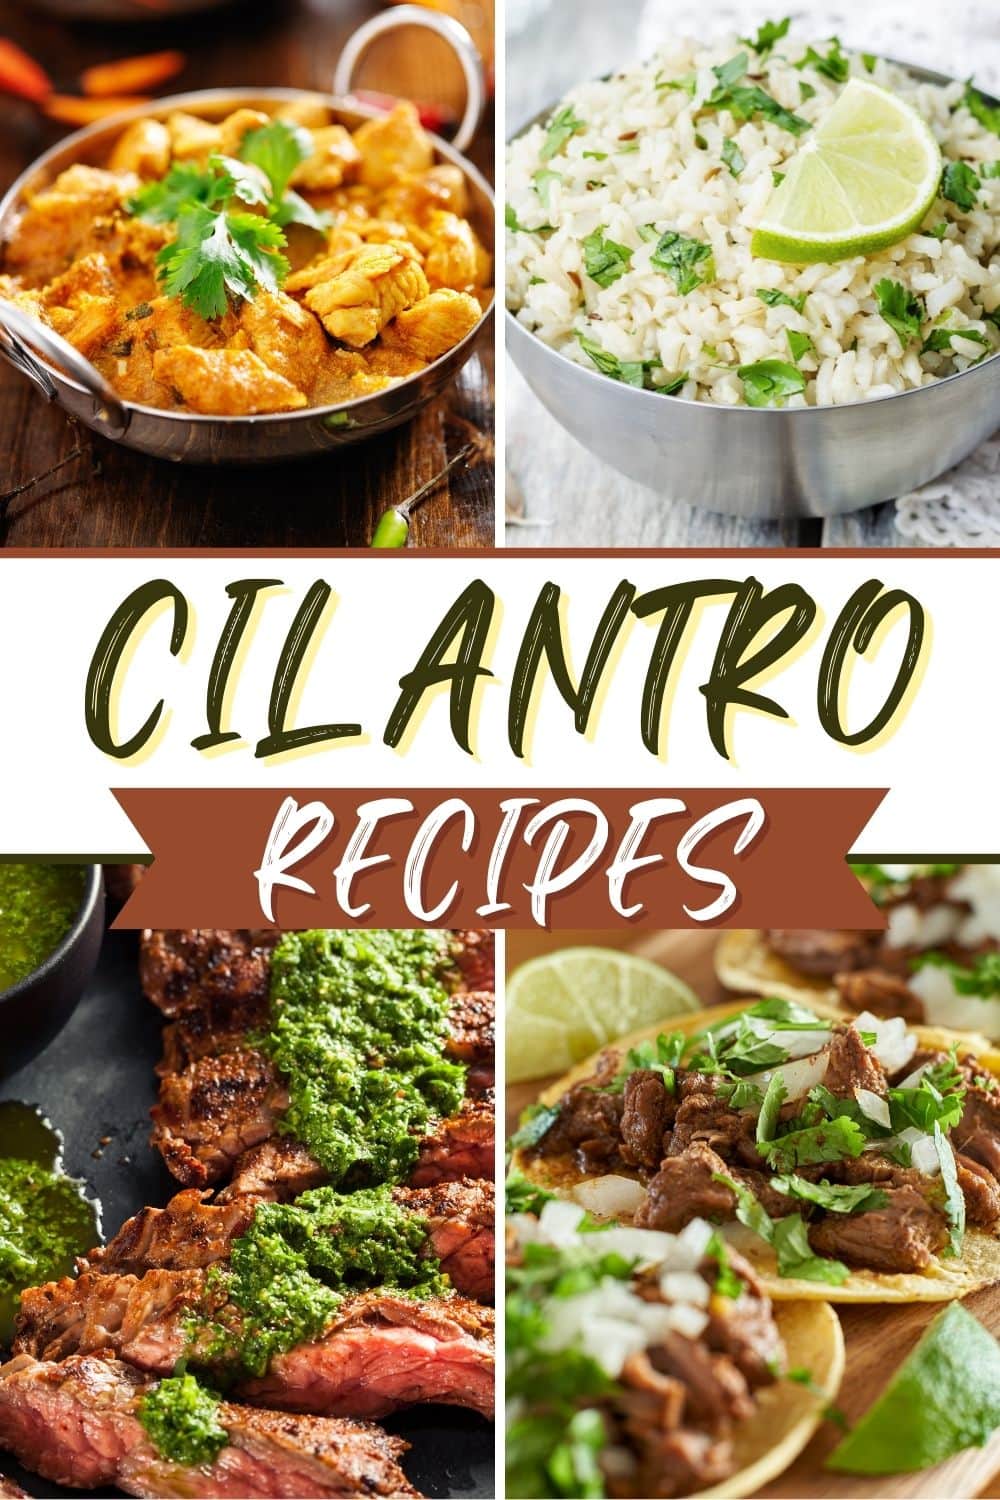 25 Fresh Cilantro Recipes With So Much Flavor - Insanely Good